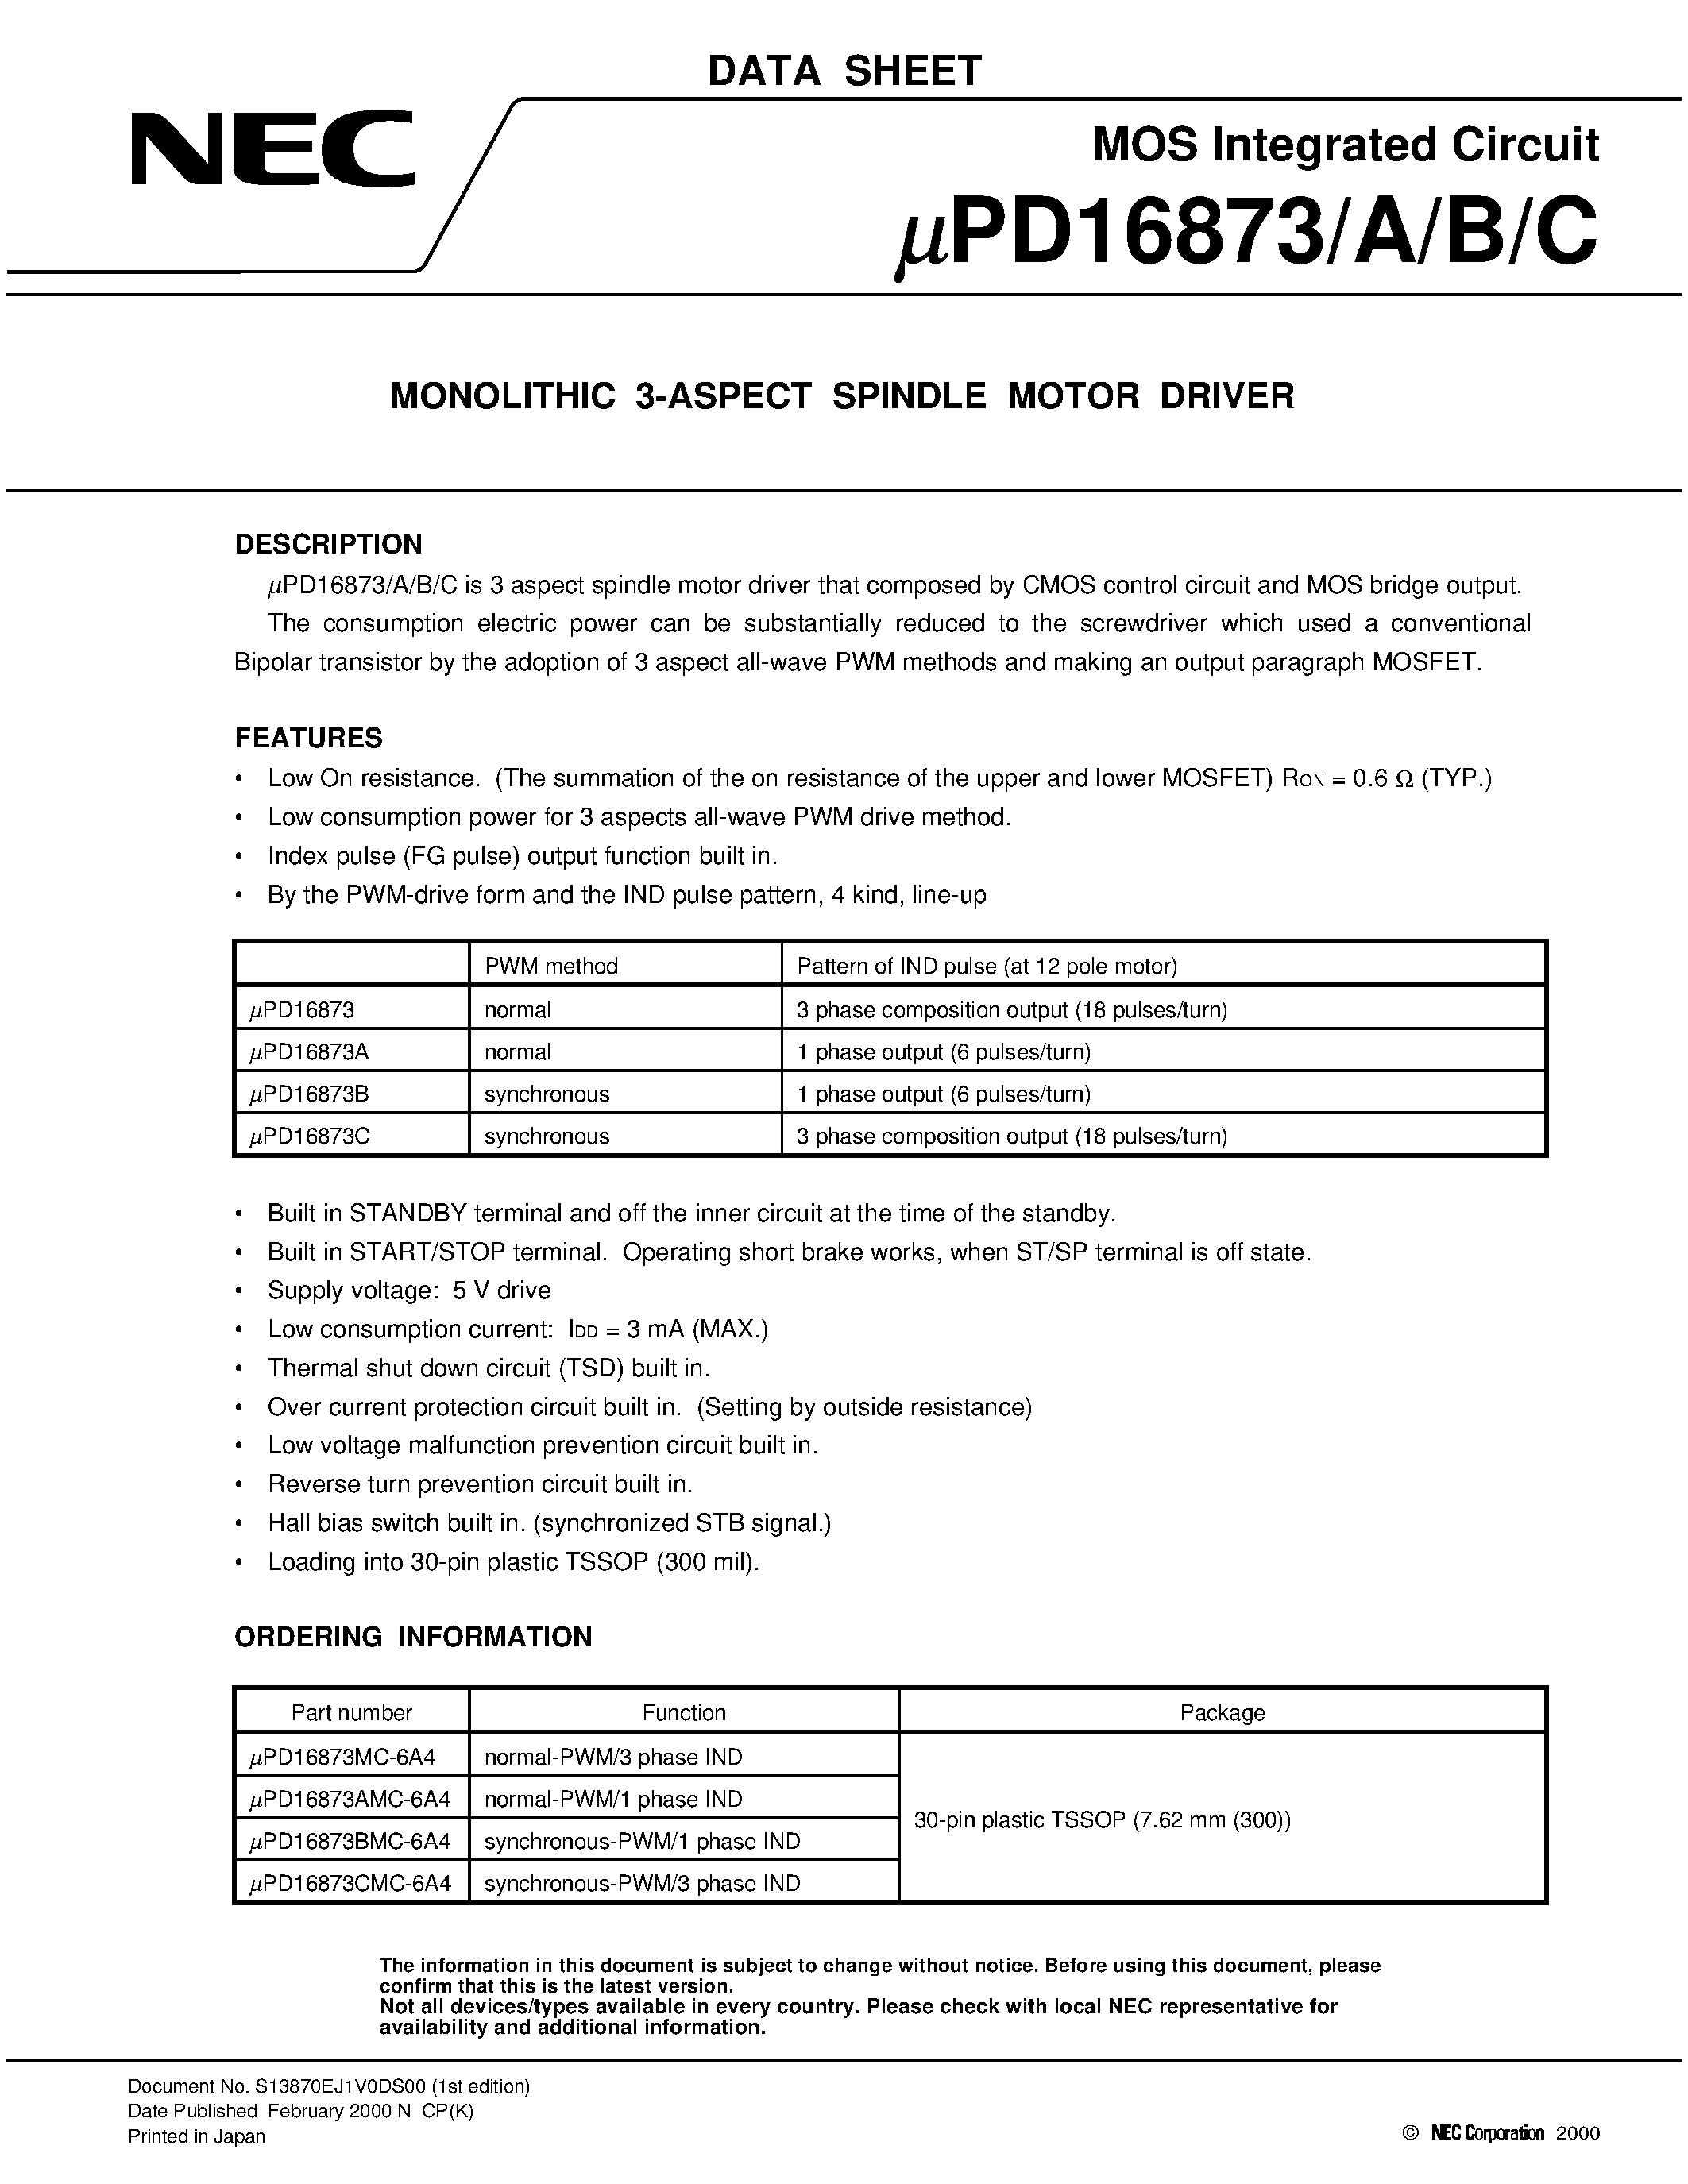 Datasheet UPD16873CMC-6A4 - MONOLITHIC 3-ASPECT SPINDLE MOTOR DRIVER page 1